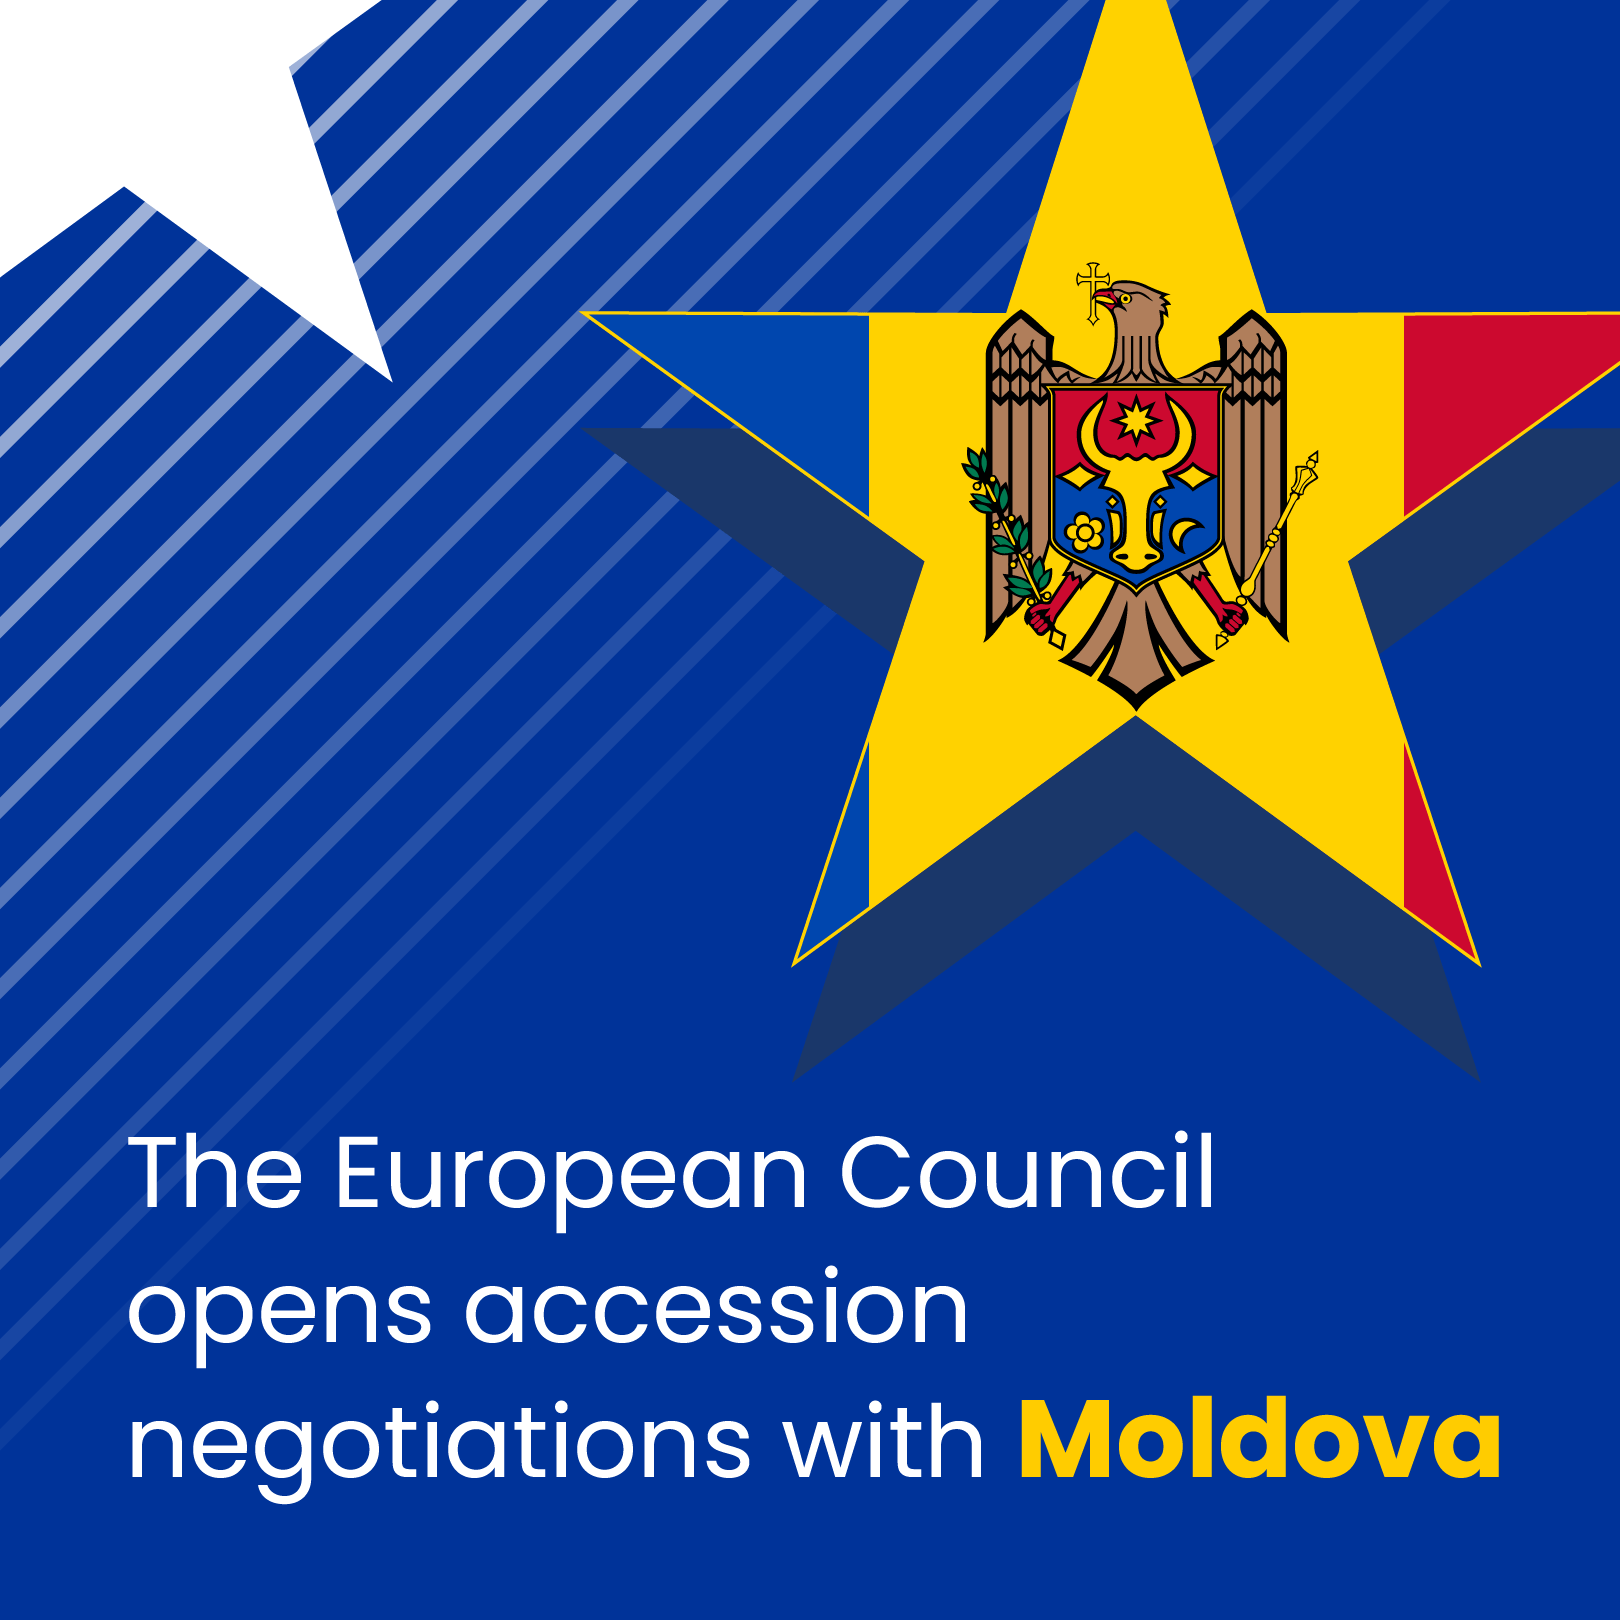 The European Council opens accession negotiations with Moldova, featuring a dynamic design with a blue background and diagonal pinstripes, a large yellow star with the Moldovan coat of arms, and prominent text.